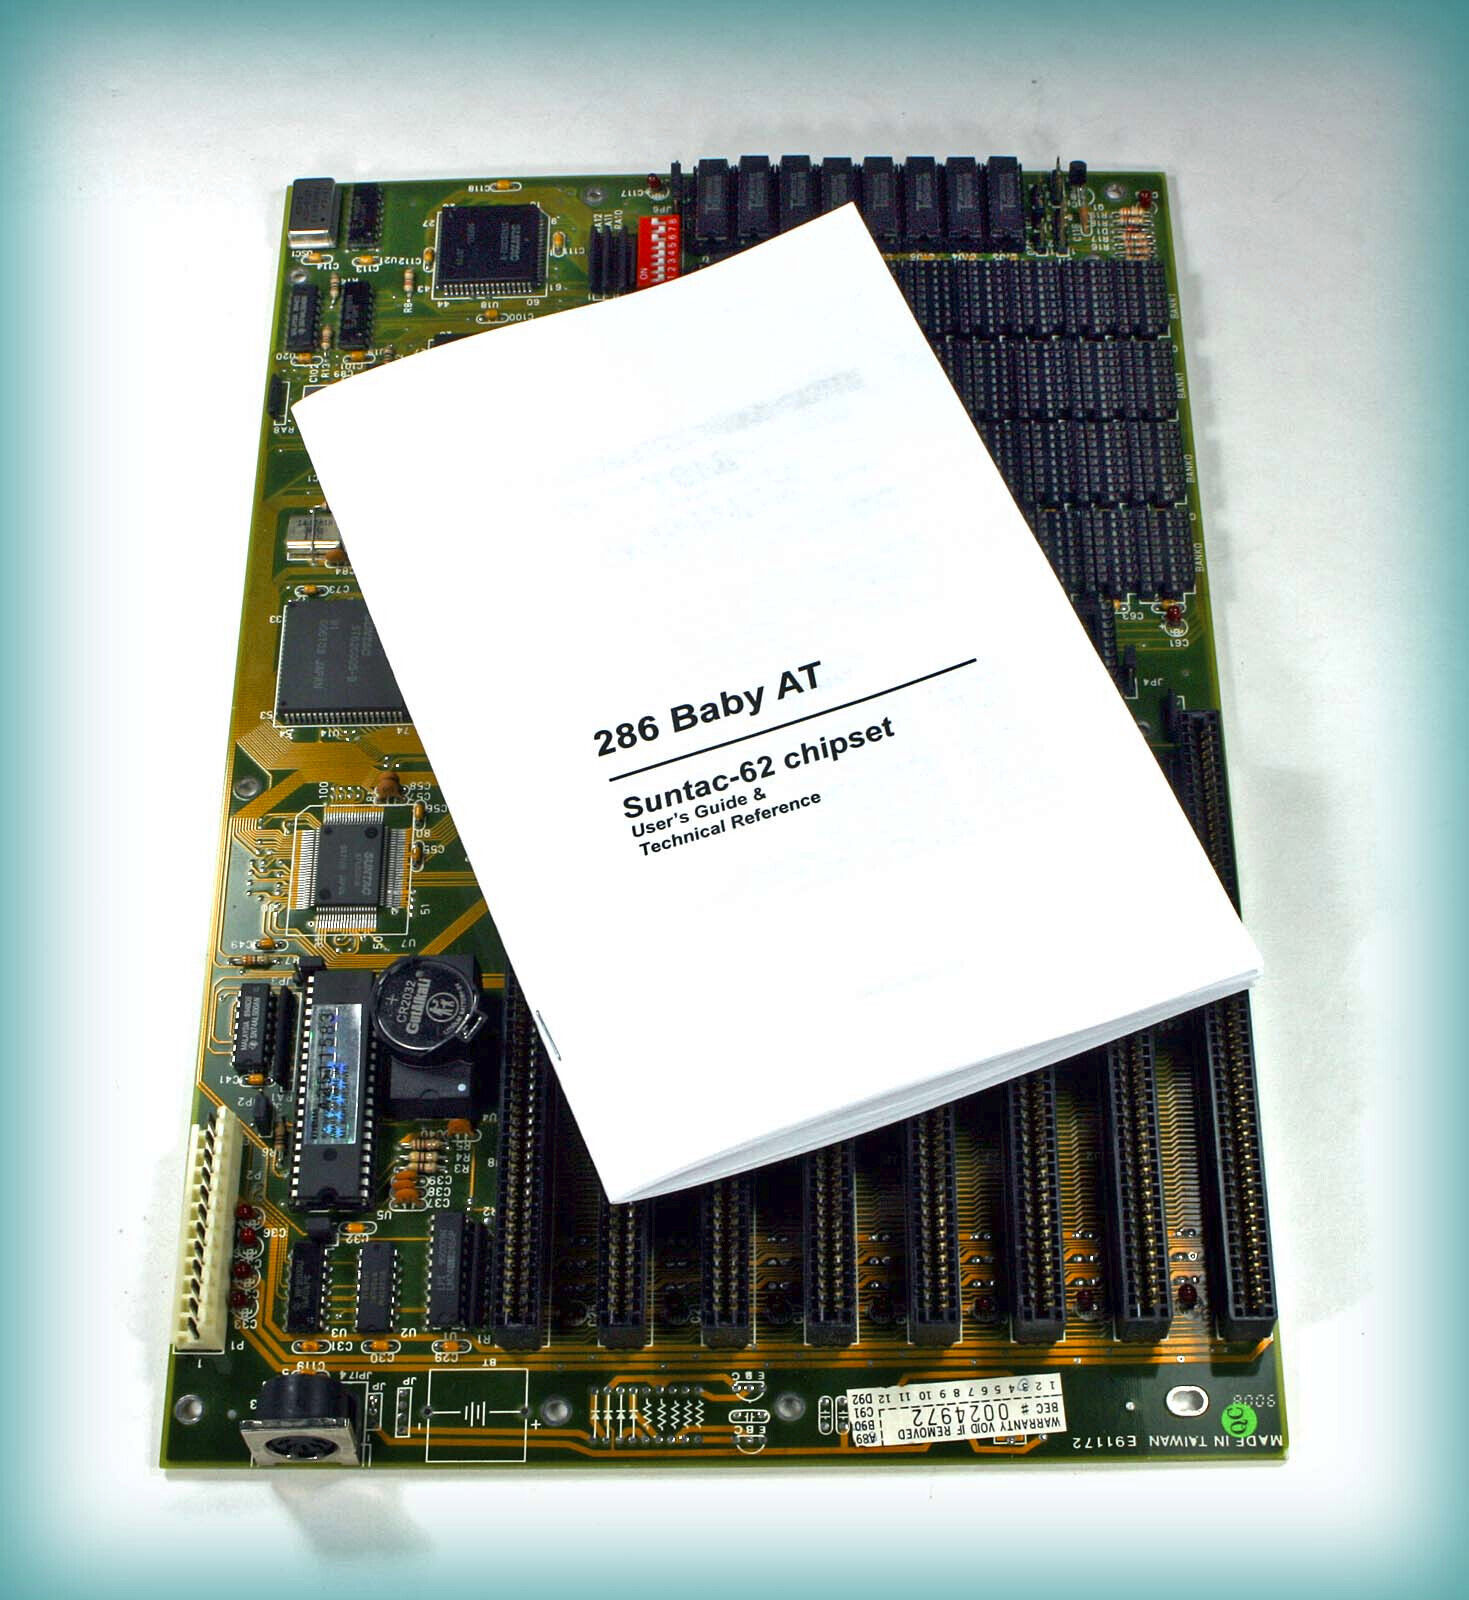 VERY RARE — MINT — 286 BABY AT — Suntac-62 chipset, FULL 34 page MANUAL — TESTED